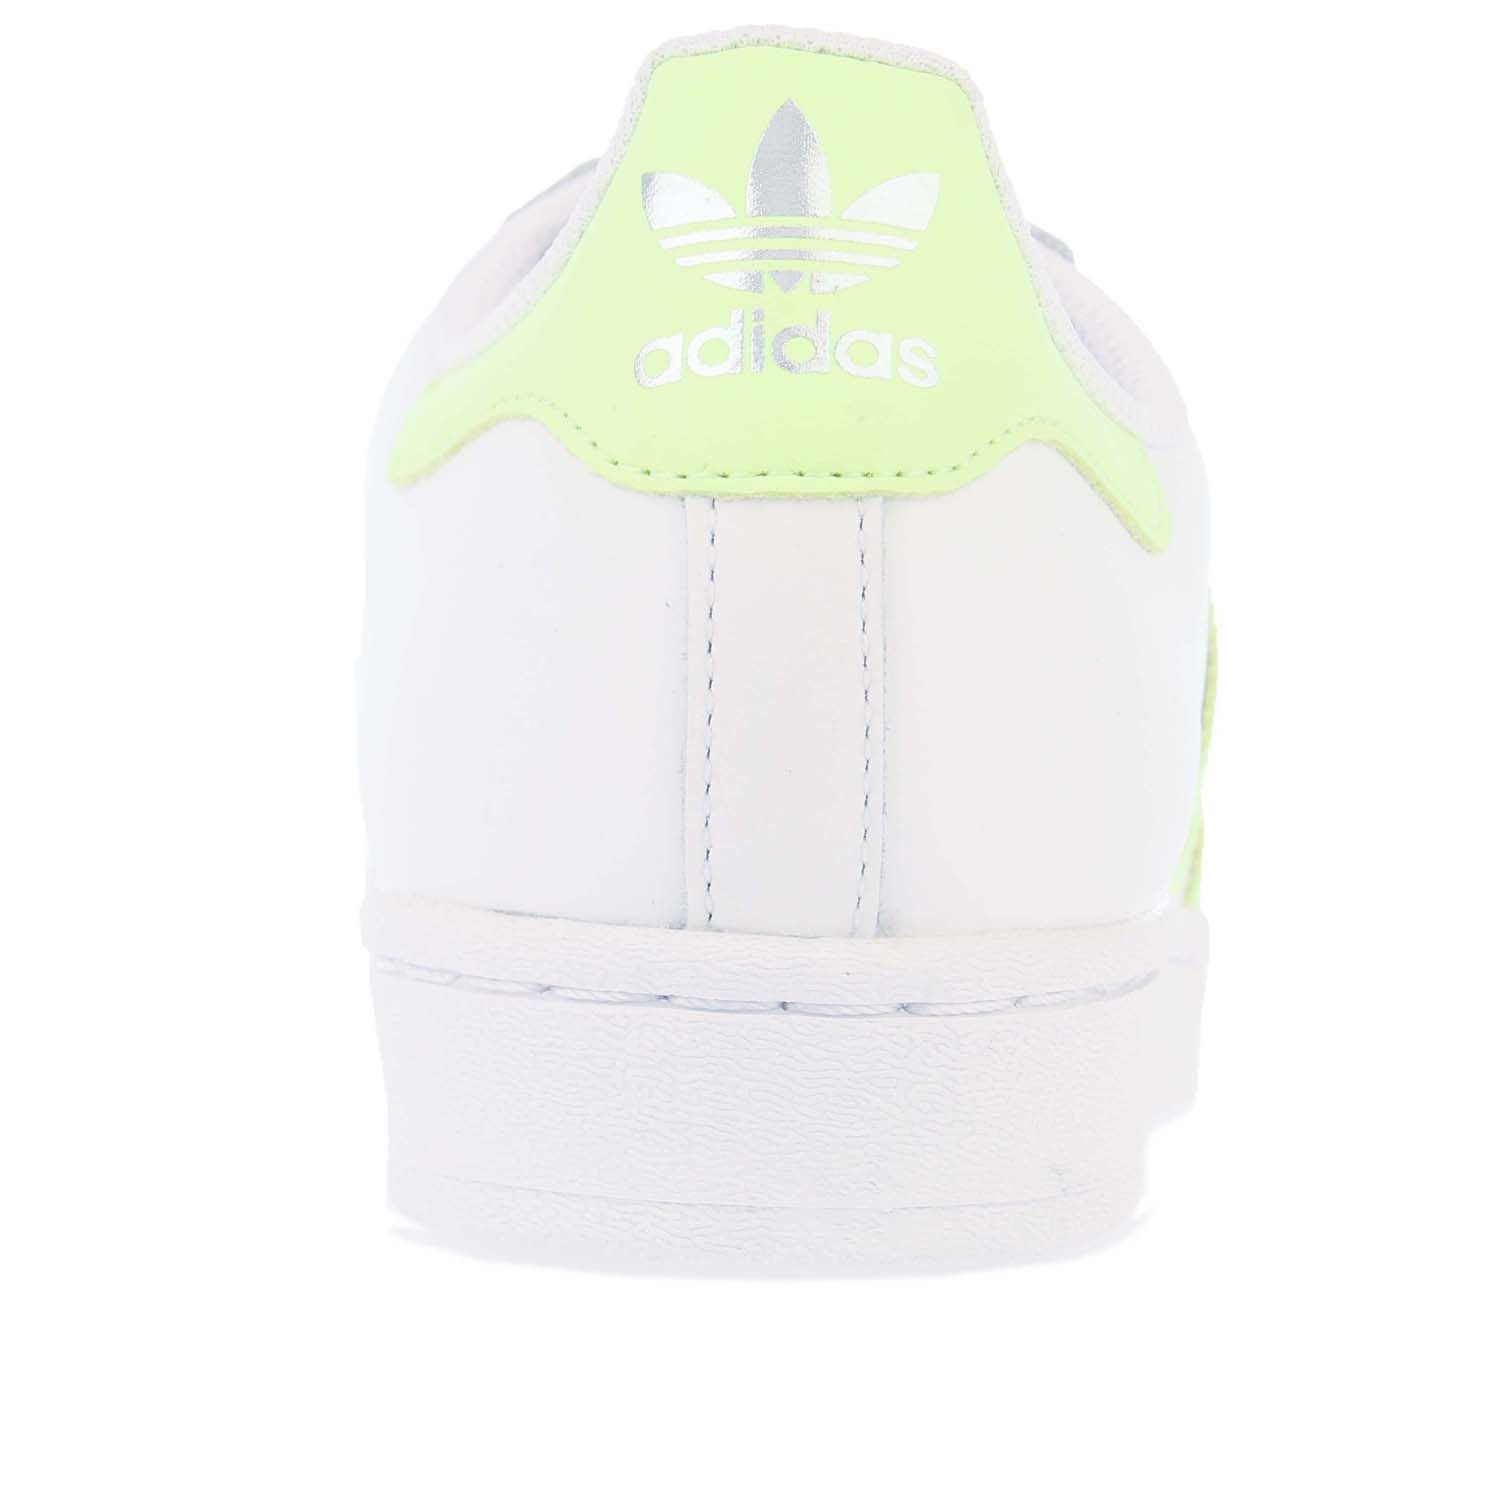 Womens adidas Originals Superstar Trainers in white yellow.- Leather upper.- Lace closure.- Regular fit.- Moulded sockliner.- Serrated 3-Stripes.- Trefoil logos to the tongue and heel. - Rubber sole. - Leather upper  Textile lining.- Ref.: FX6090